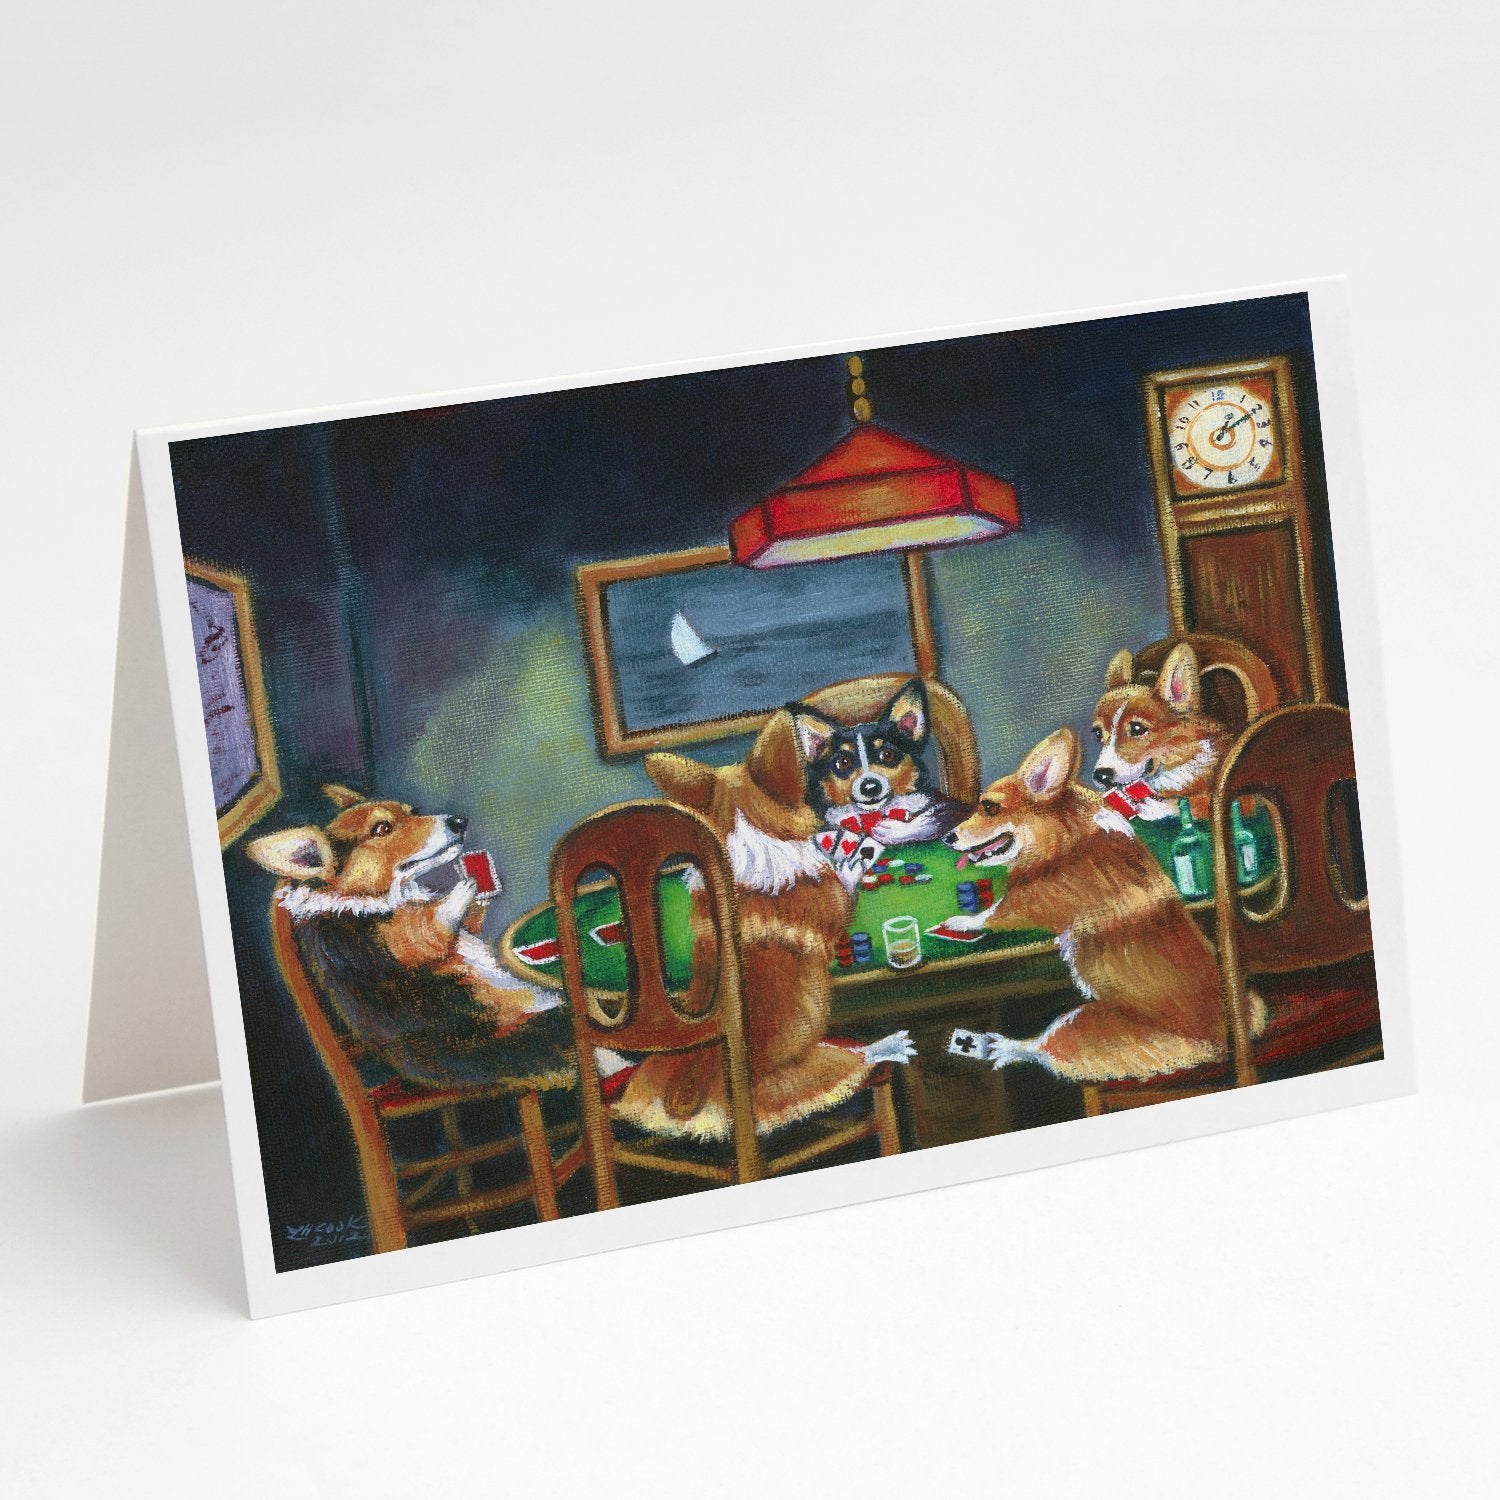 Buy this Corgi Playing Poker Greeting Cards and Envelopes Pack of 8